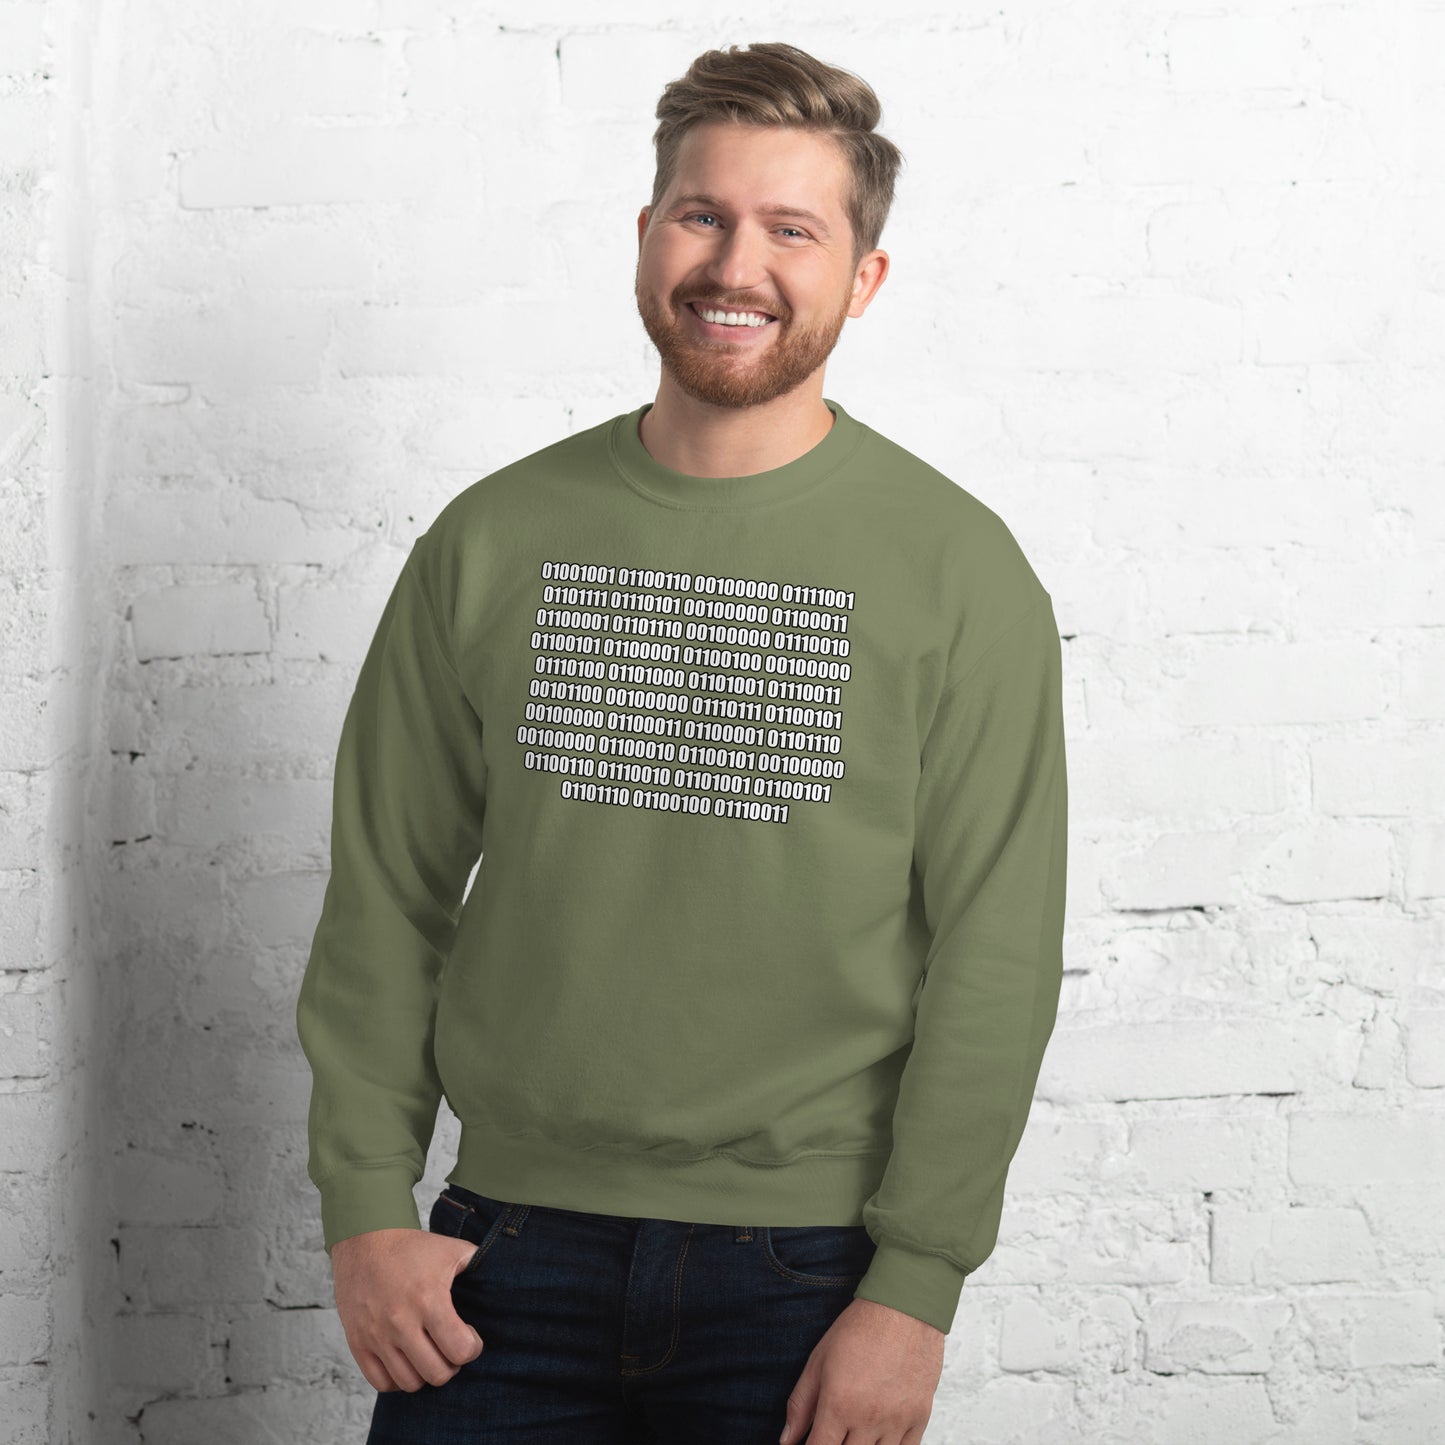 Men with military green sweatshirt with binaire text "If you can read this"